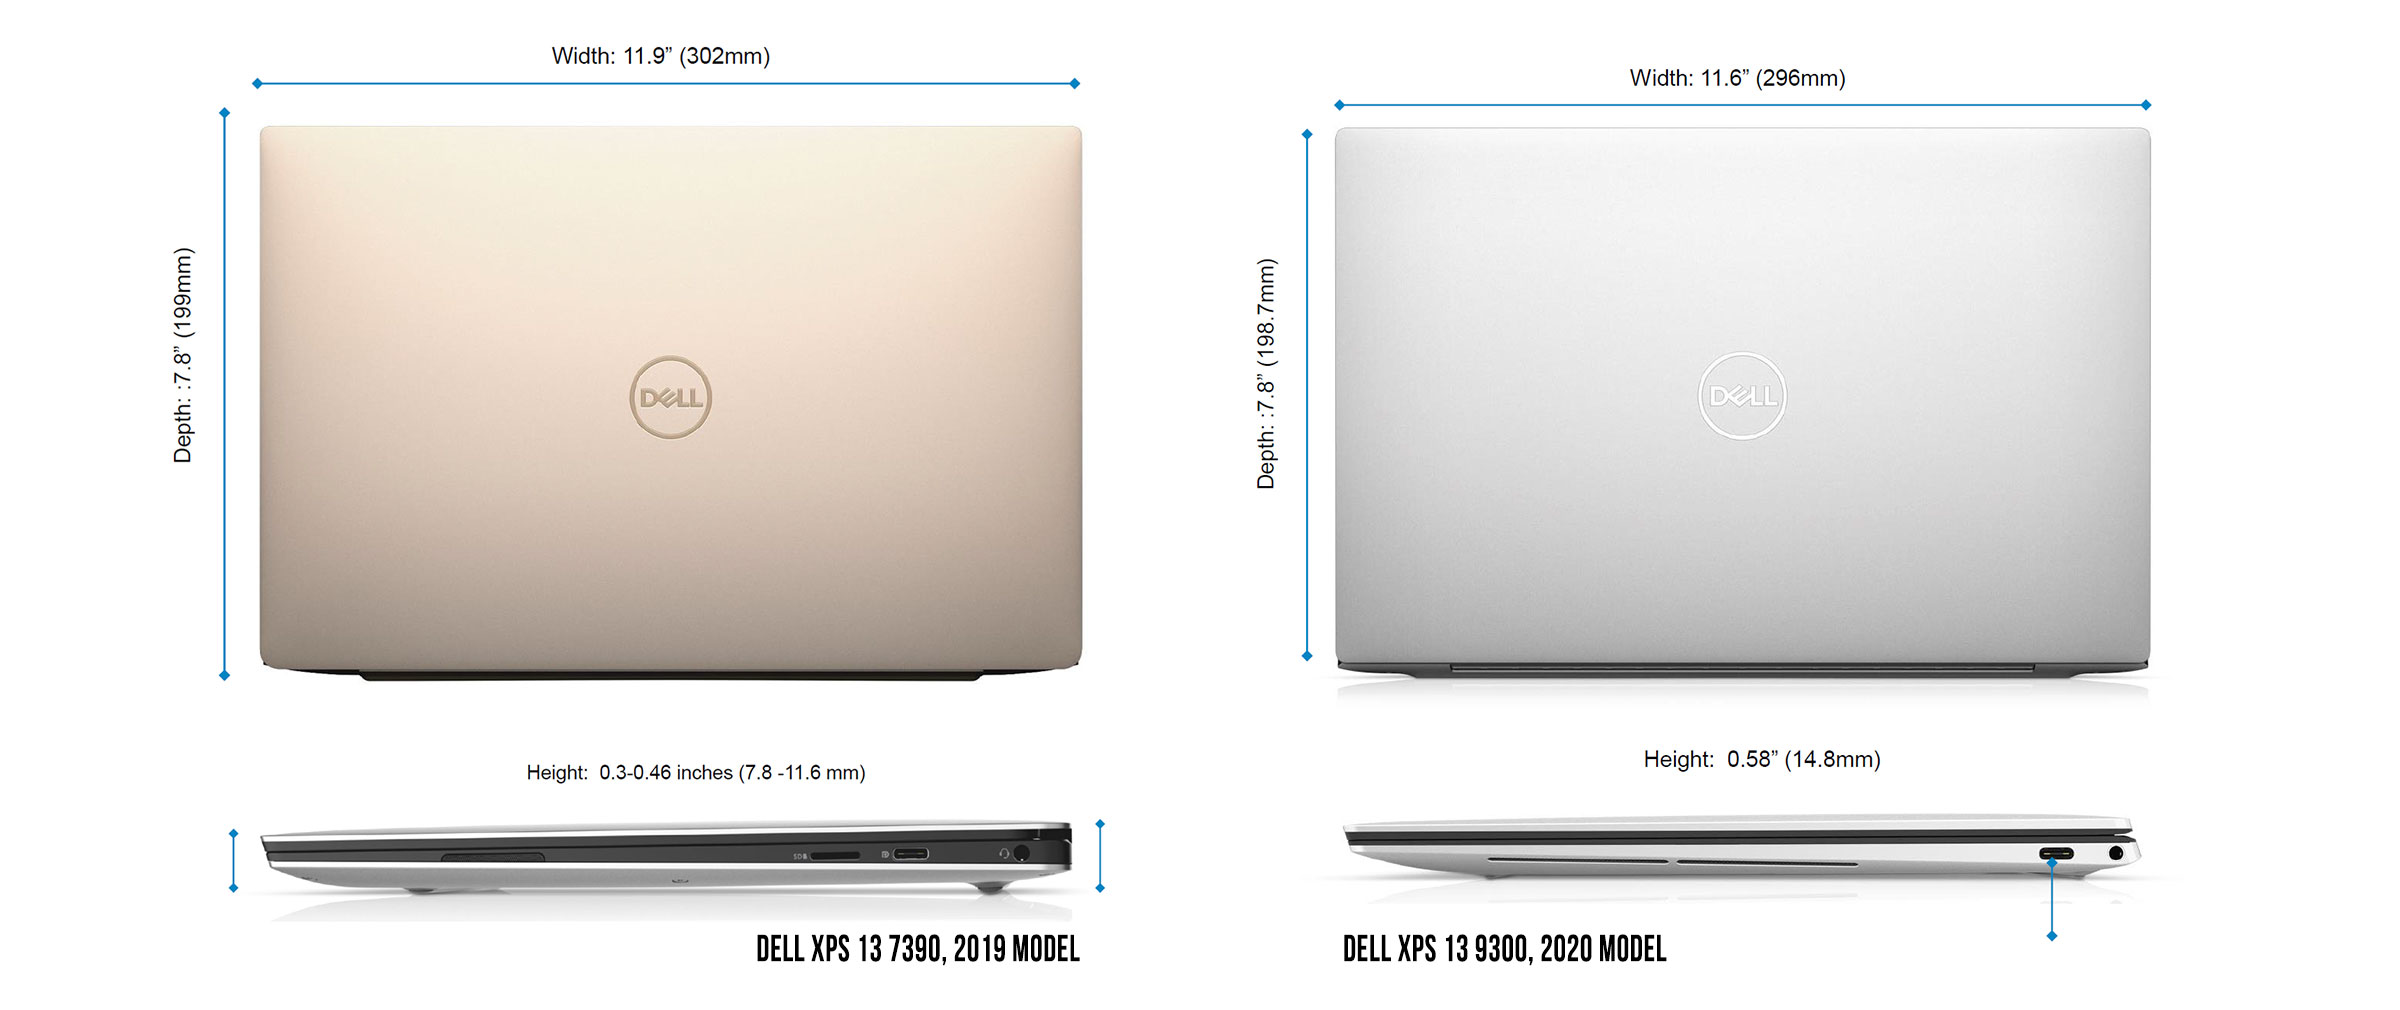 Dell XPS 13 9300 size